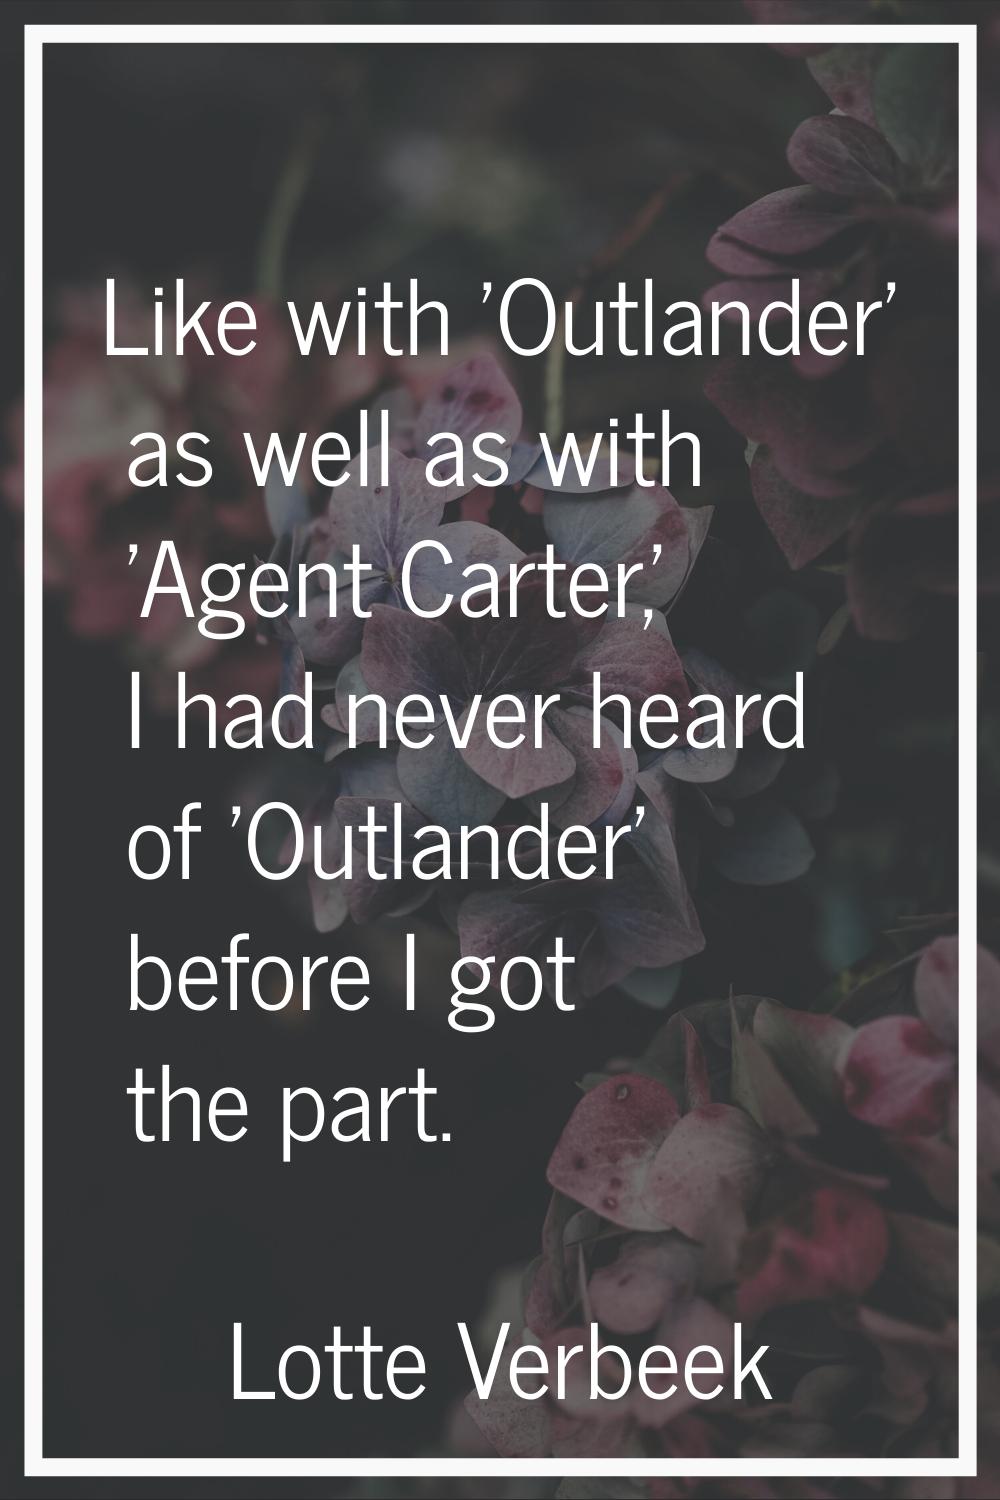 Like with 'Outlander' as well as with 'Agent Carter,' I had never heard of 'Outlander' before I got